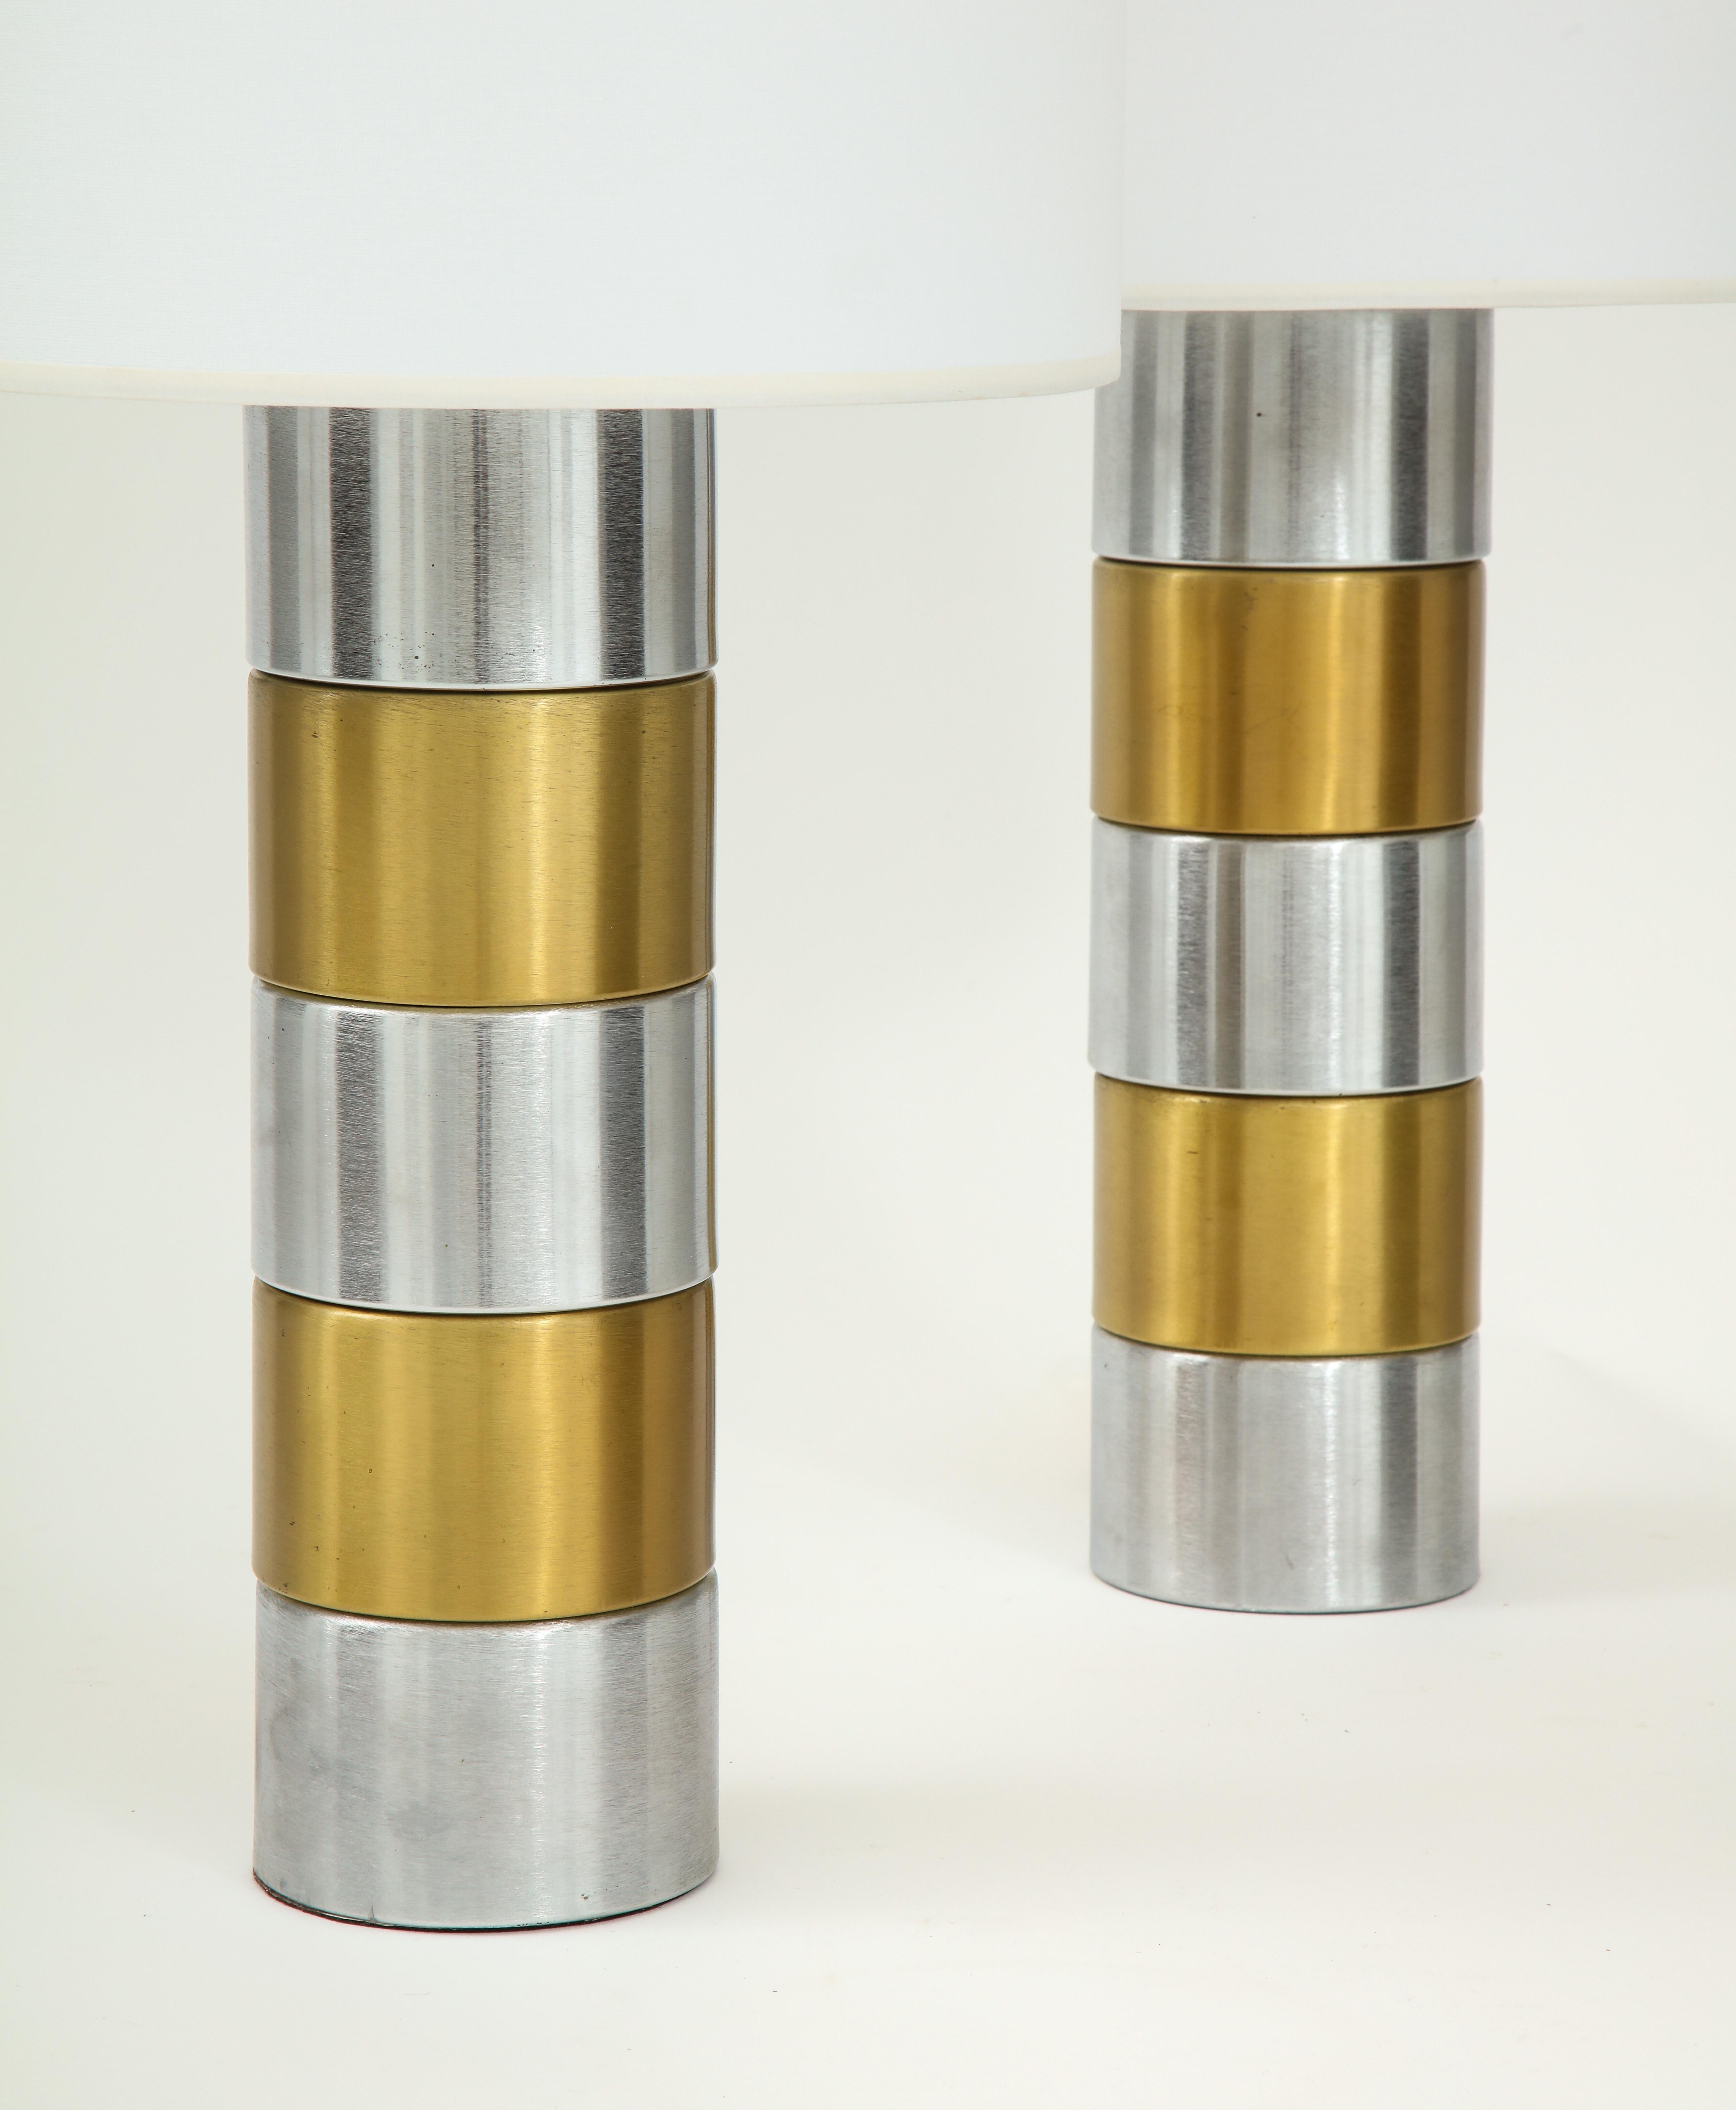 Pair of brushed steel and brass lamps.
The lamp shades are not included.